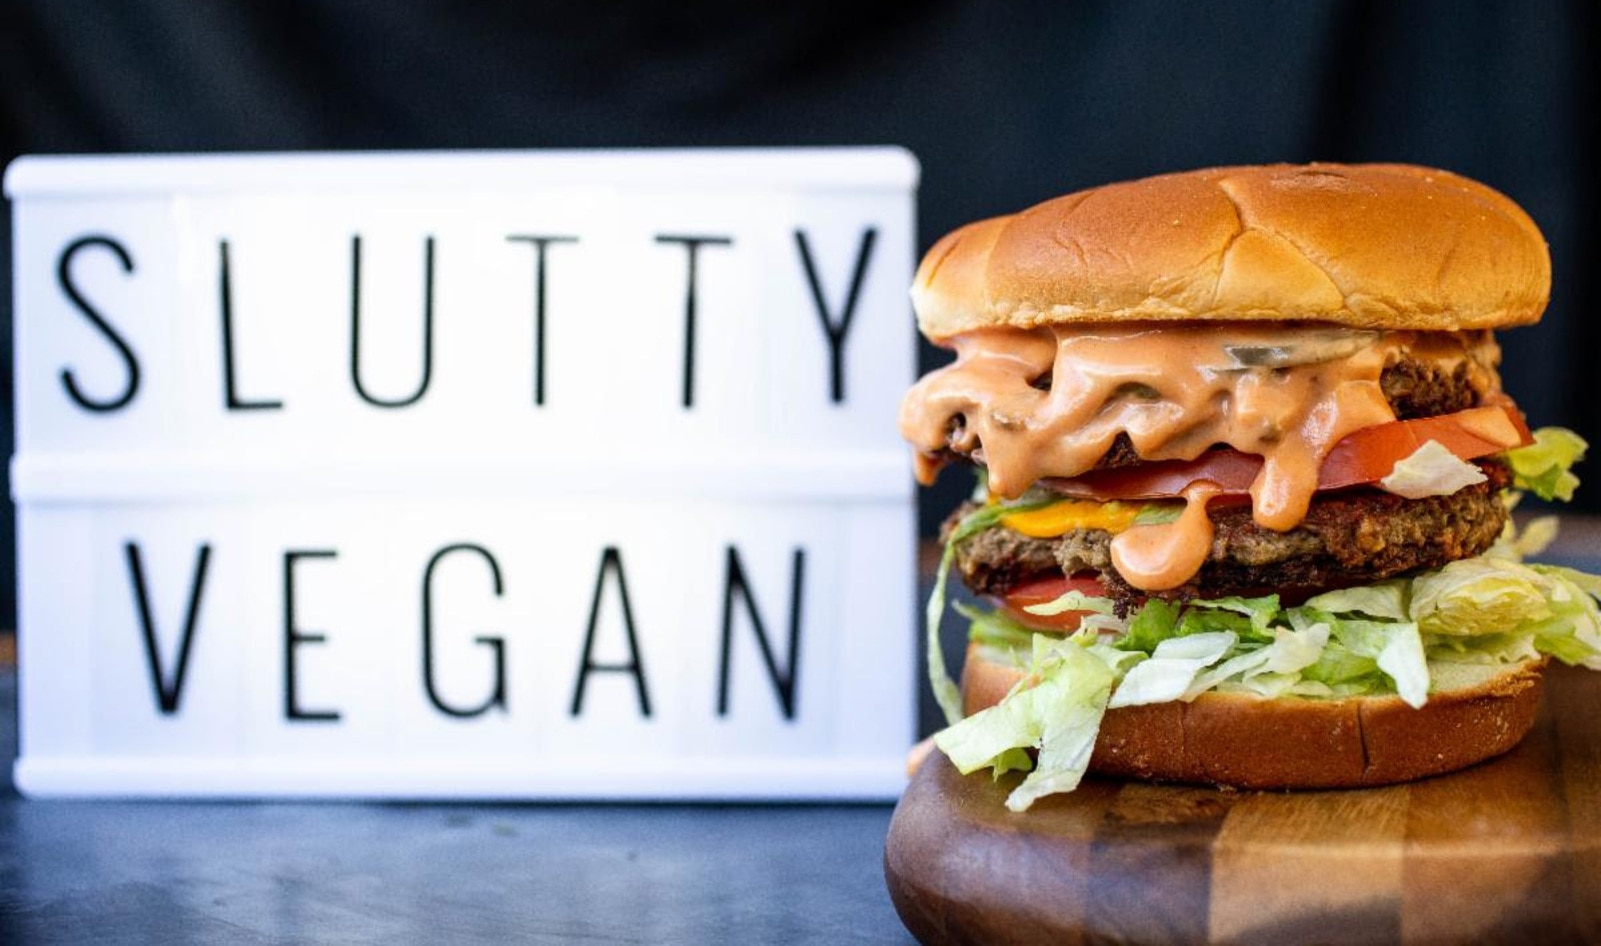 Slutty Vegan to Hand Out Thousands of Impossible Burgers to Atlanta’s Essential Workers